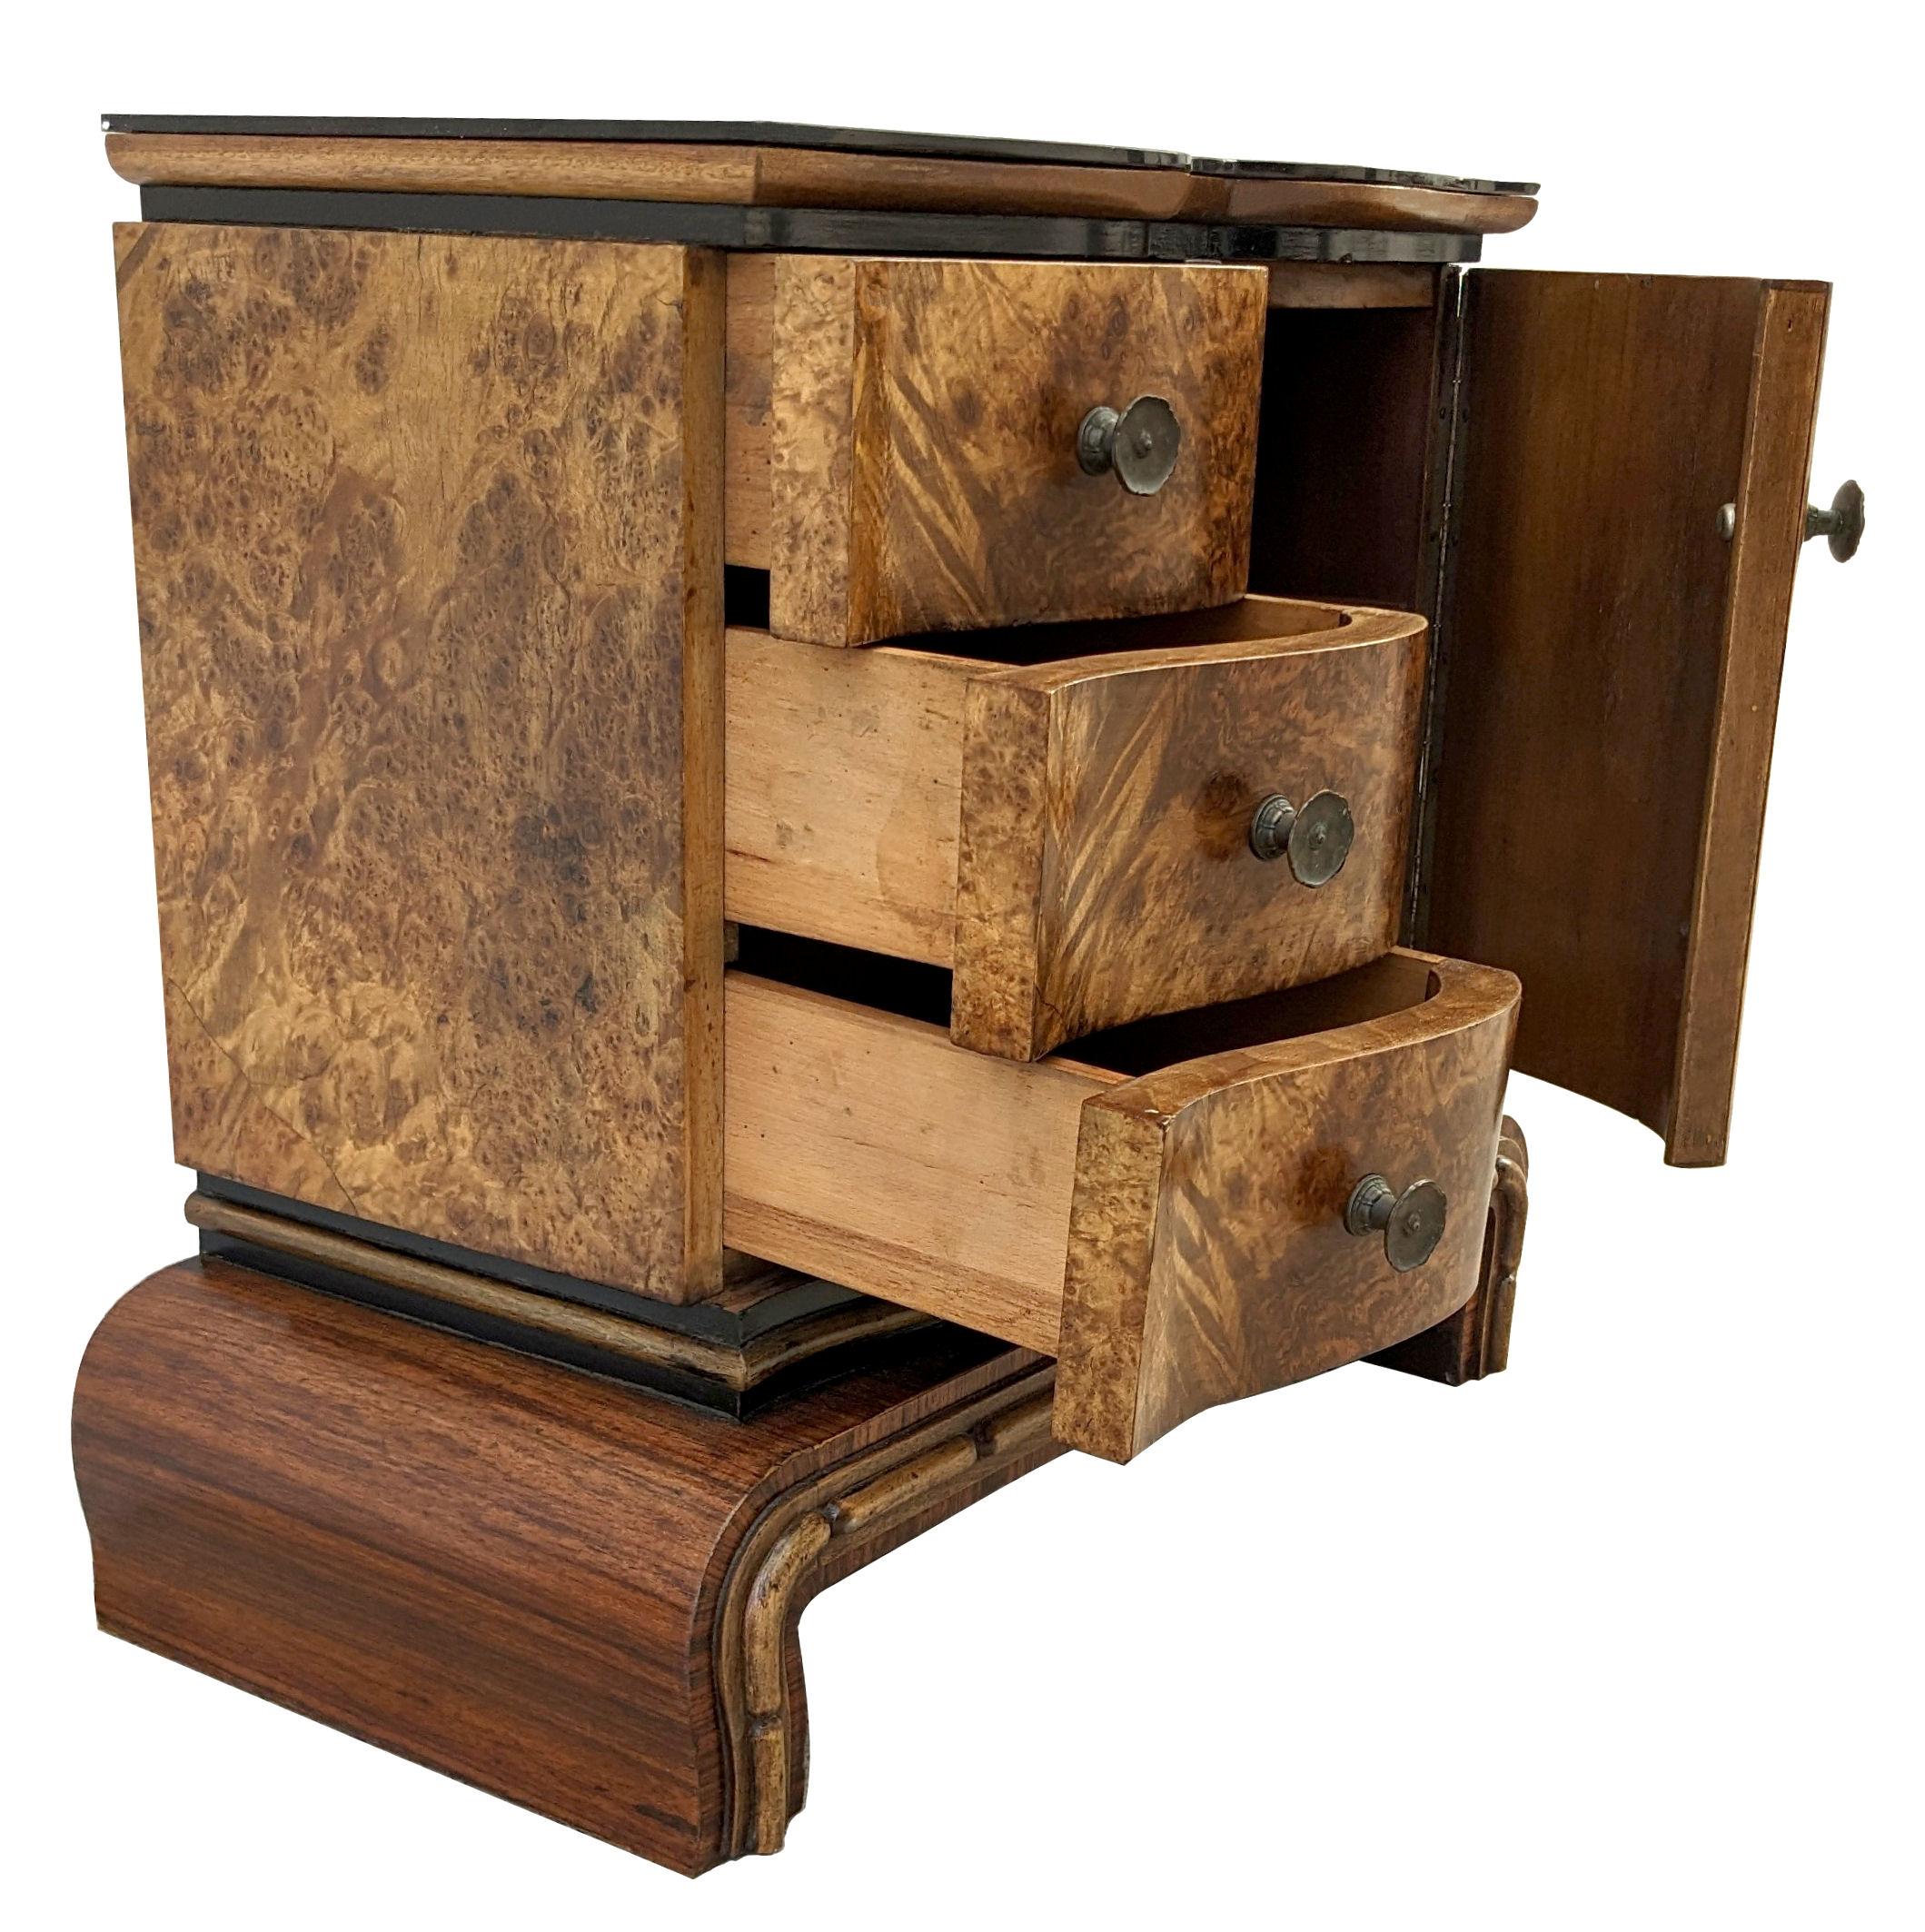 Art Deco Italian Pair of Matching Bedside Cabinet, Nightstands in Walnut, c1930 For Sale 3